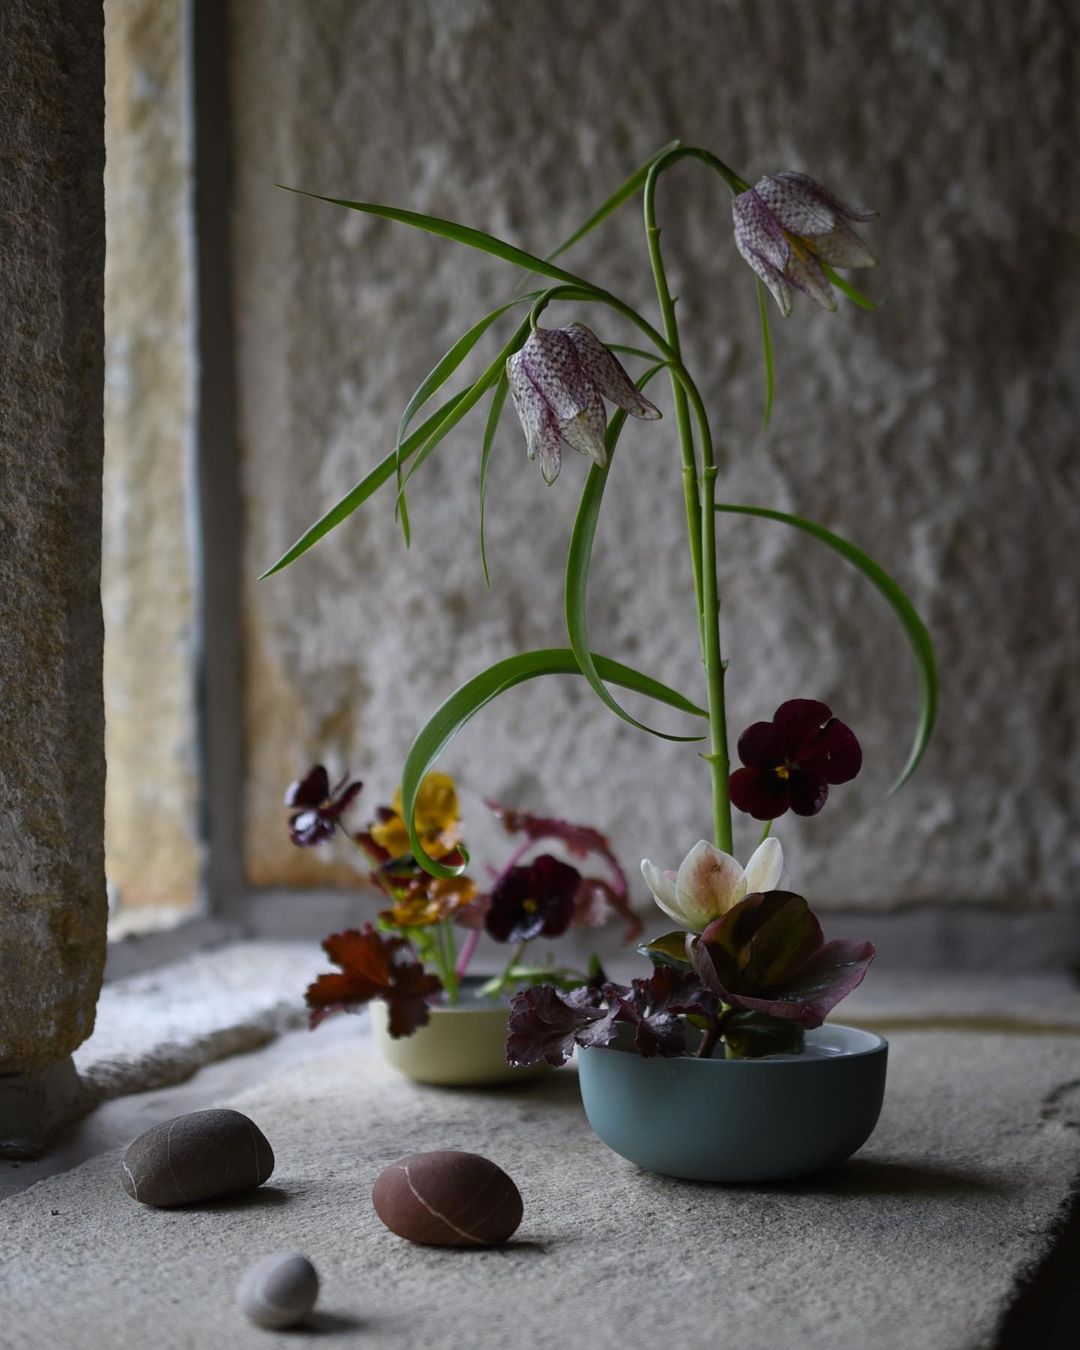 What It Means To Grow My Own Flowers - sarah statham blog - ikebana inspired designs -on thursd